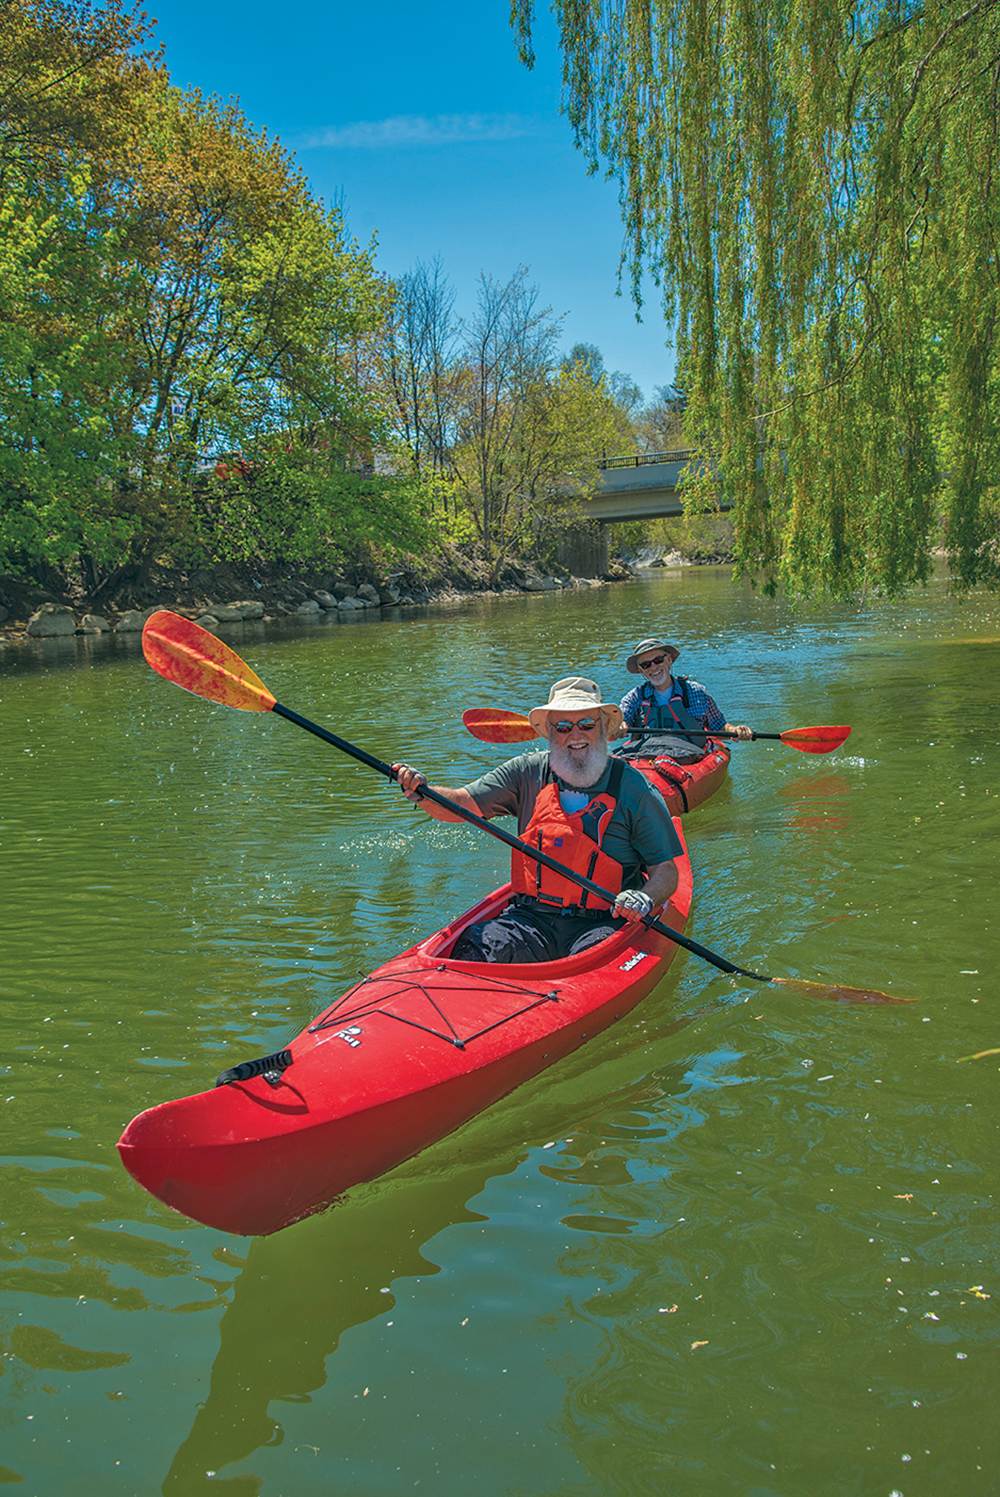 Customers of West’s kayak rental business in Meaford Harbour can also paddle the Big Head River